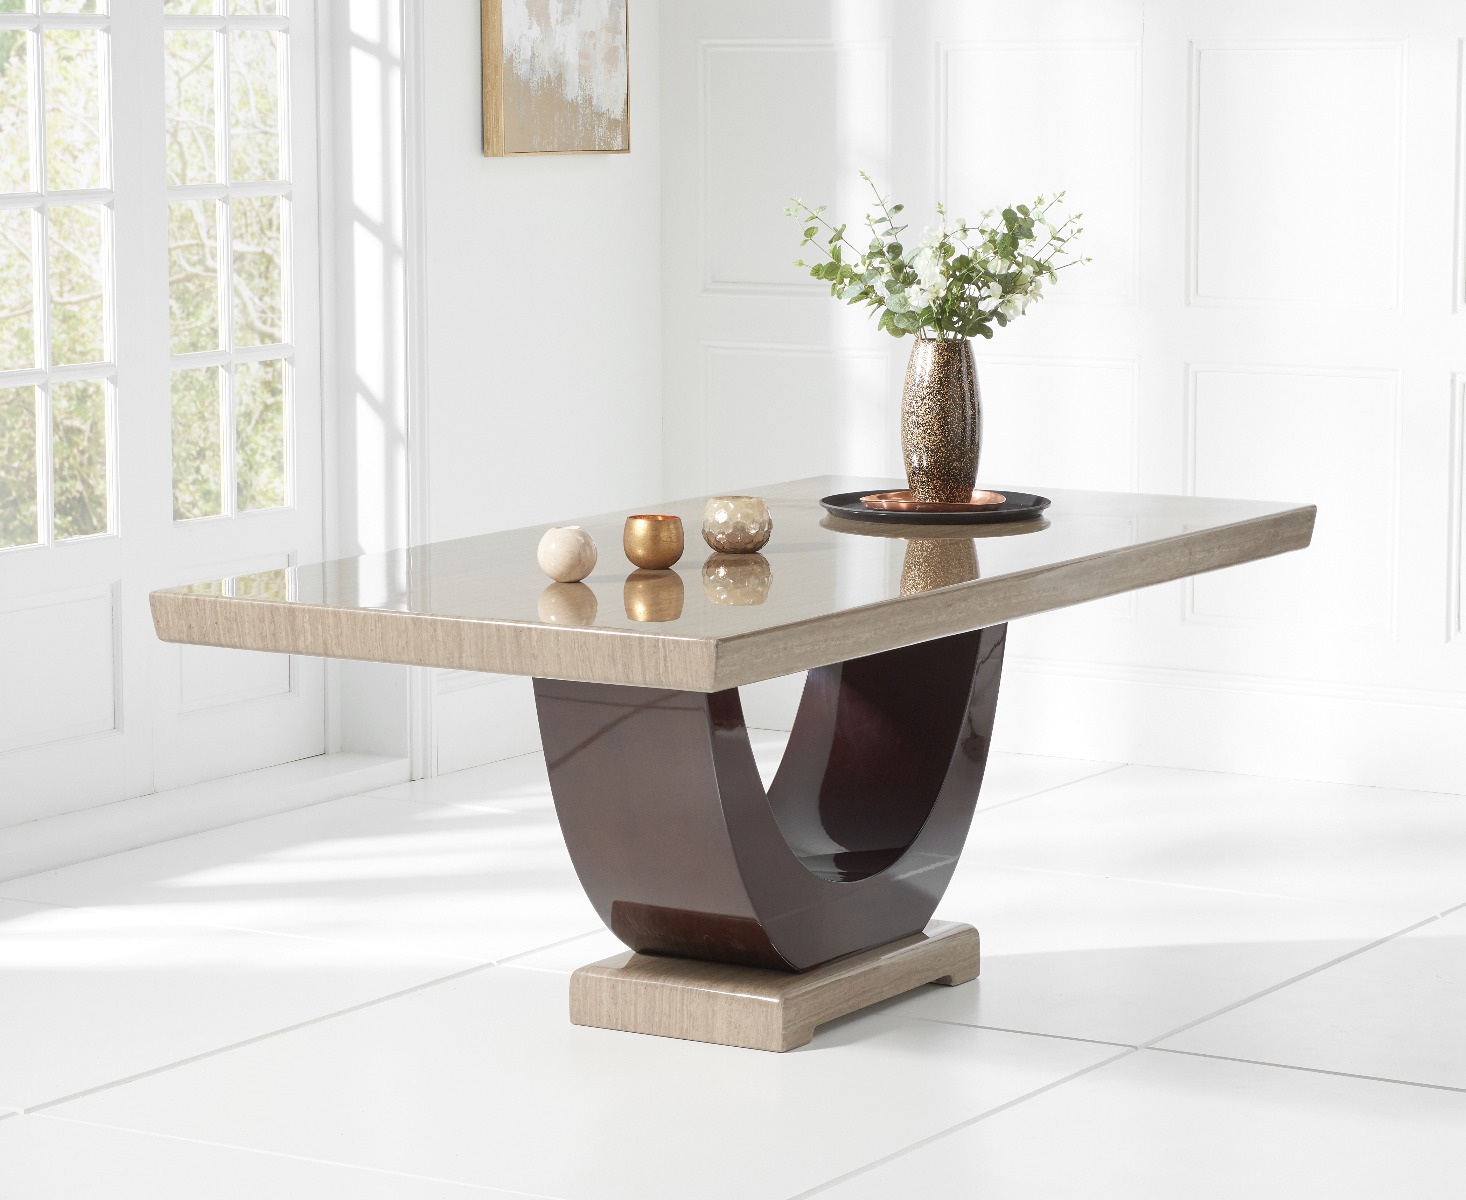 Photo 4 of Novara 200cm brown pedestal marble dining table with 10 brown novara chairs